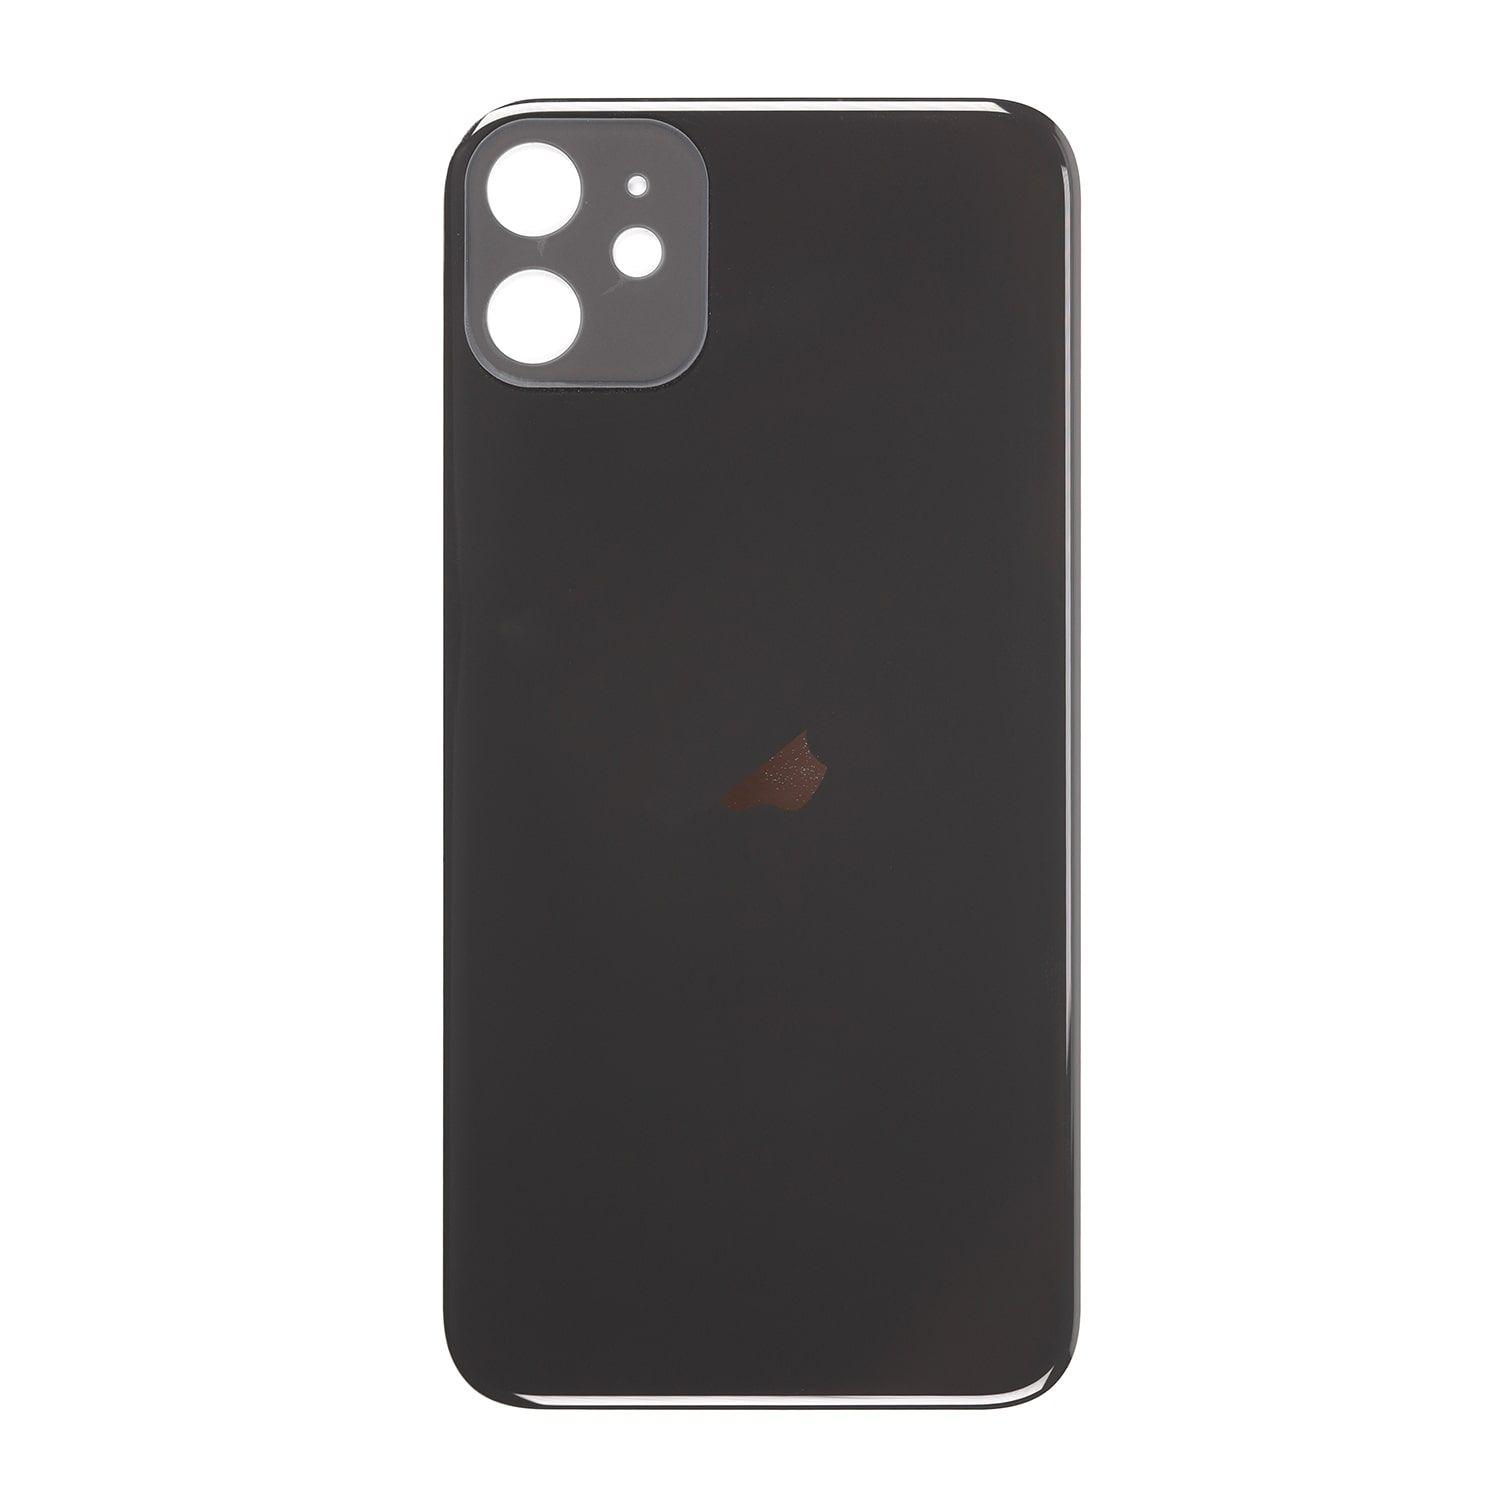 Iphone 11 pro max black flip without camera glass